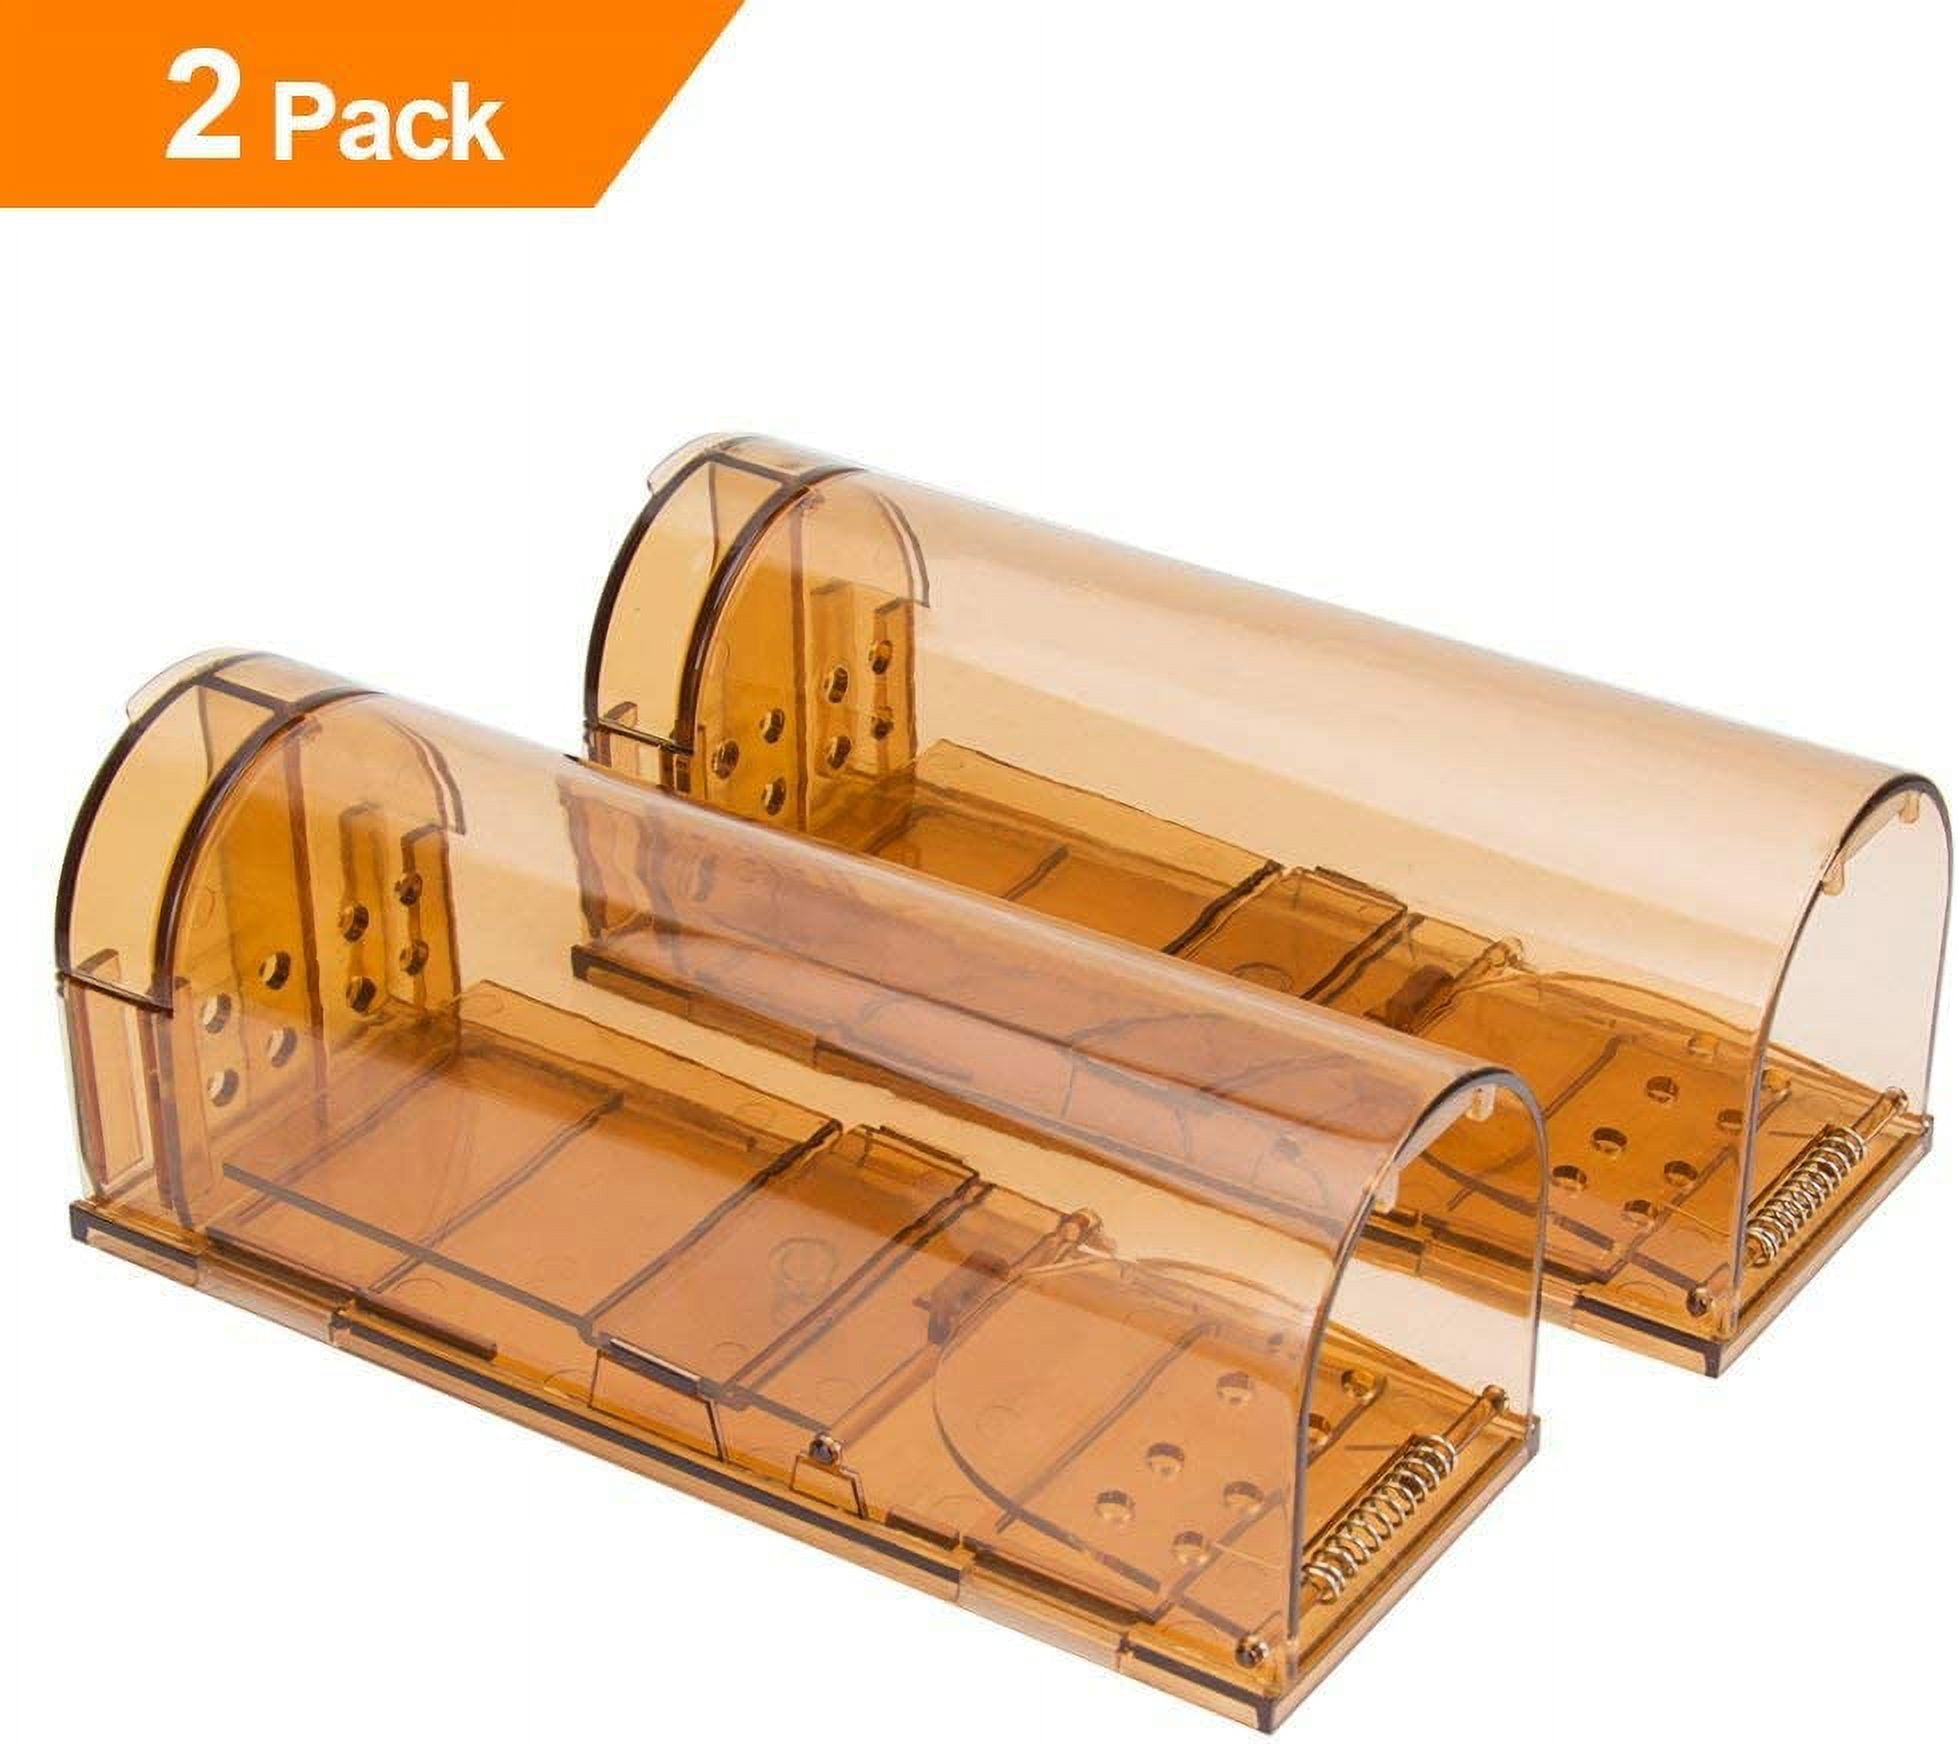  CaptSure Original Humane Mouse Traps, Easy to Set, Kids/Pets  Safe, Reusable for Indoor/Outdoor use, for Small  Rodent/Voles/Hamsters/Moles Catcher That Works. 2 Pack (S-Squared, Brown) :  Patio, Lawn & Garden